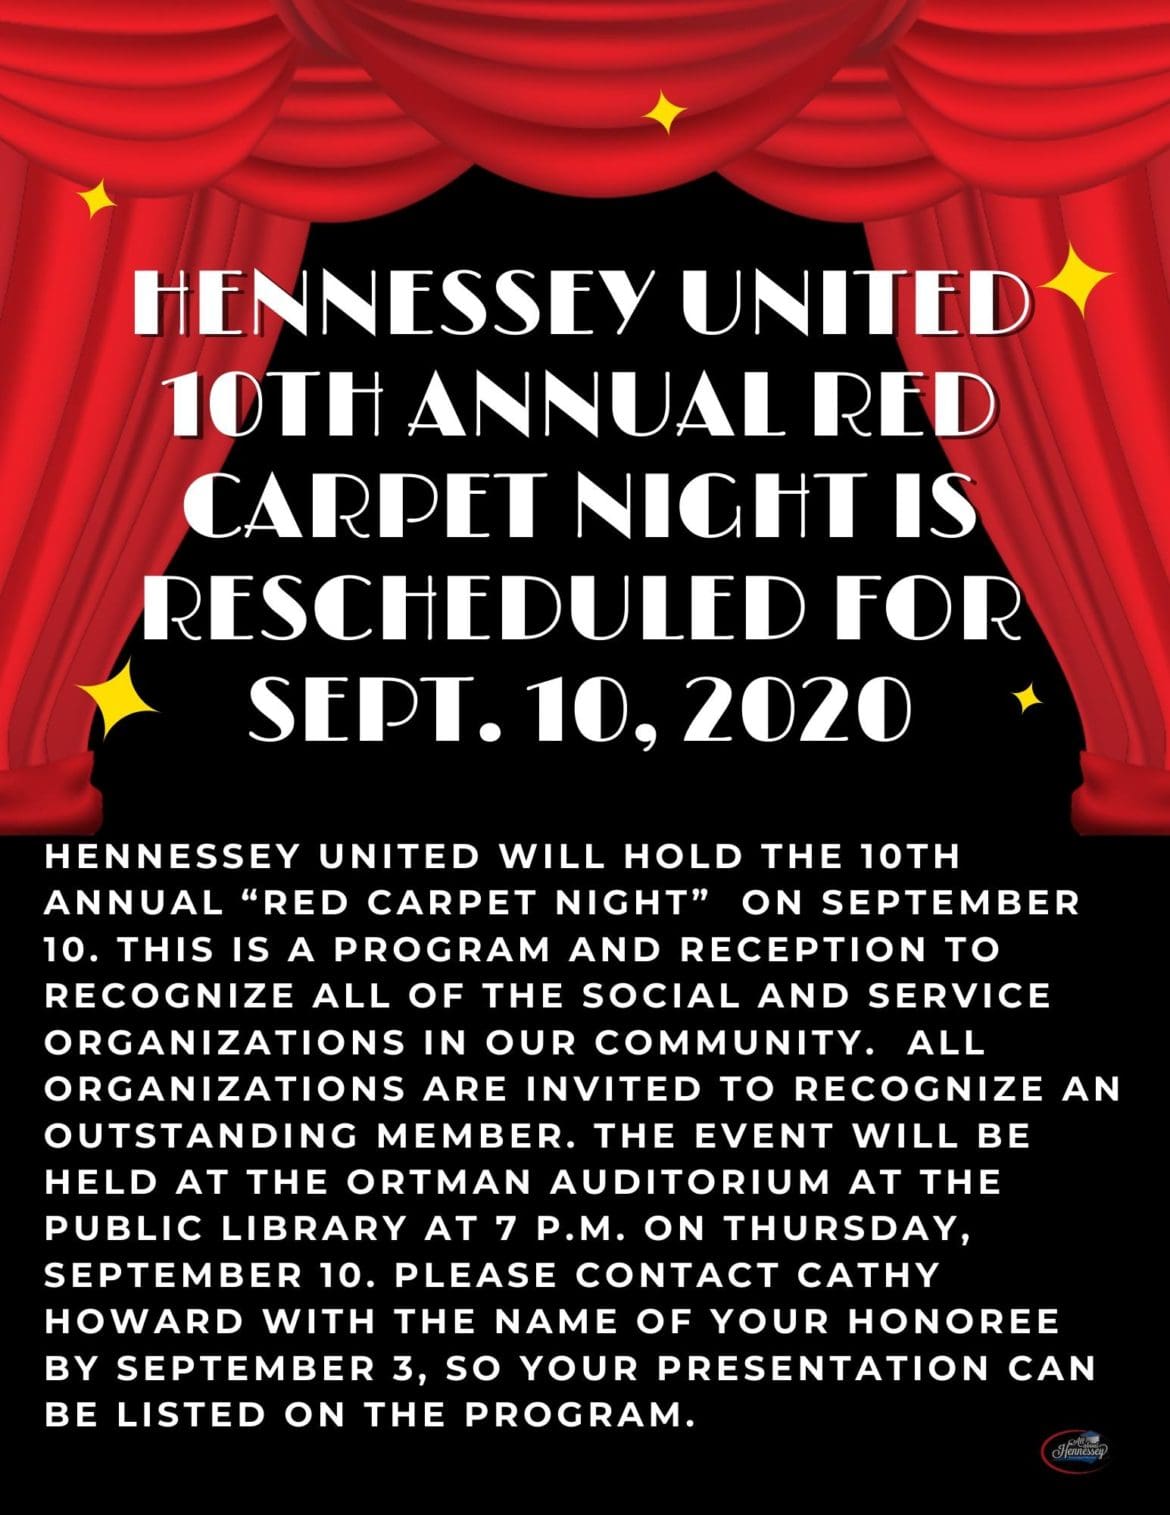 HENNESSEY UNITED 10TH ANNUAL RED CARPET NIGHT IS RESCHEDULED FOR SEPT. 10, 2020